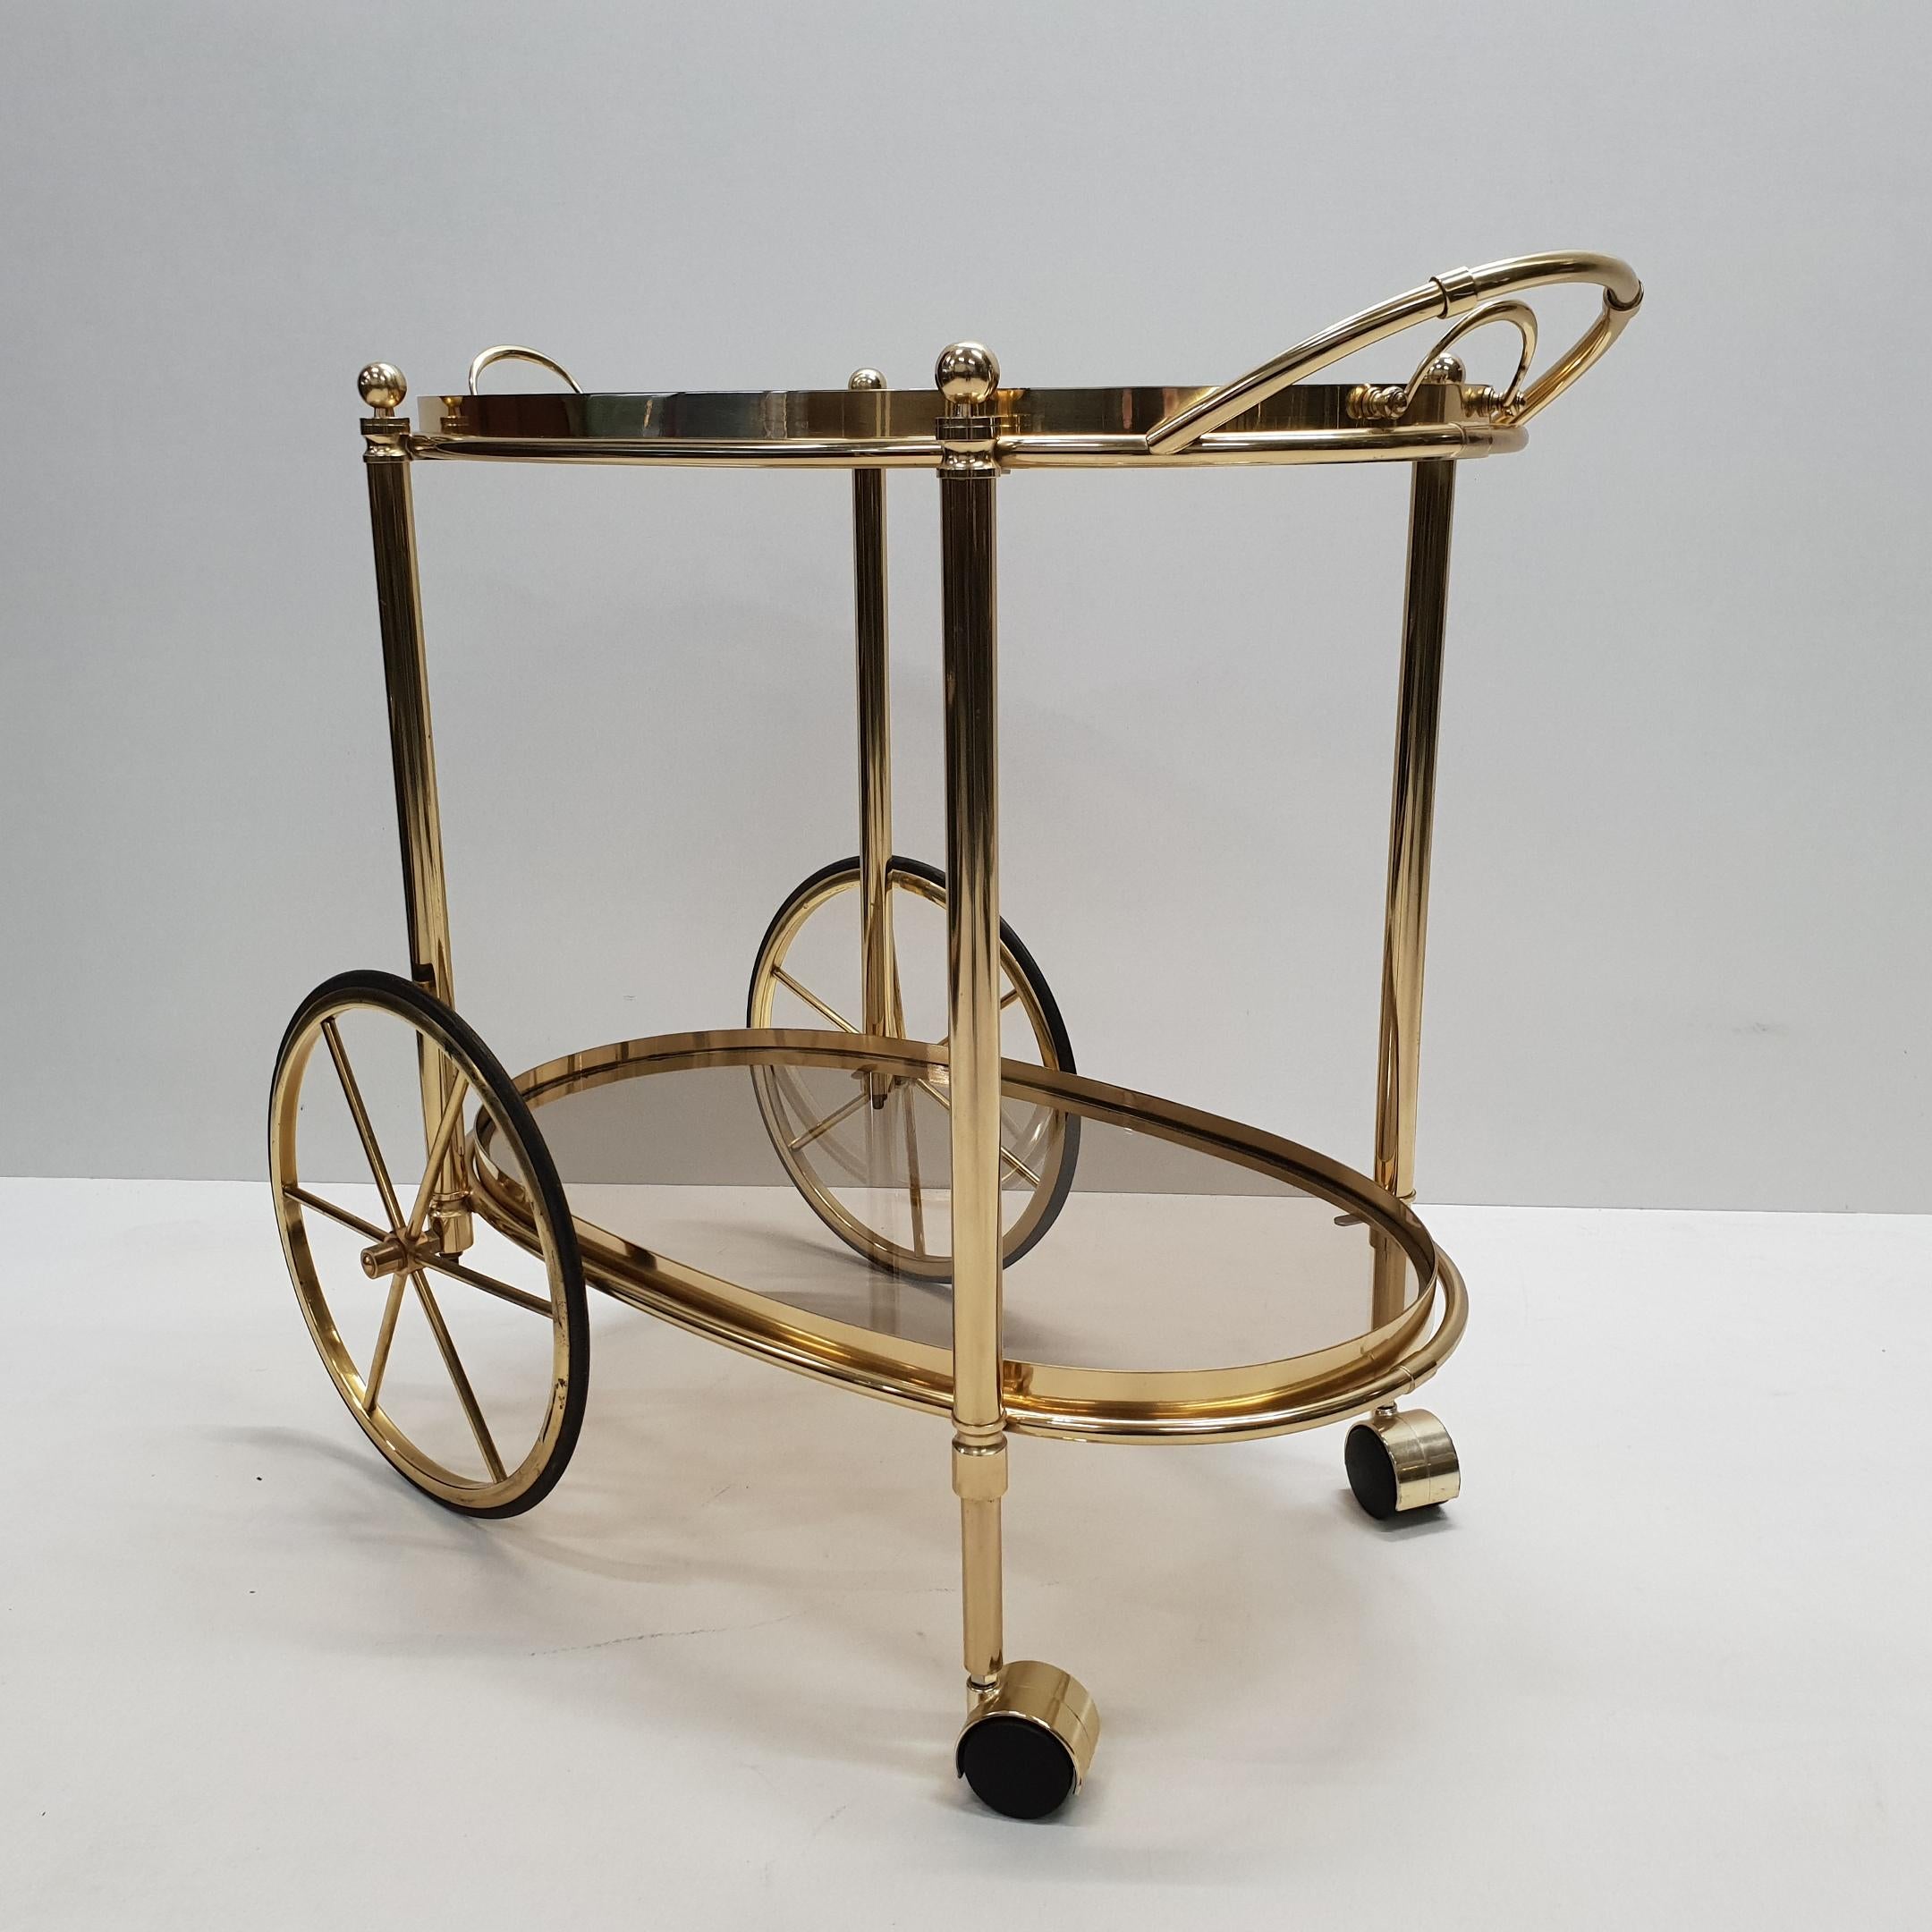 Hollywood Regency High Quality Italian Brass Trolley Bar Cart with Smoked Glass, 1980s For Sale